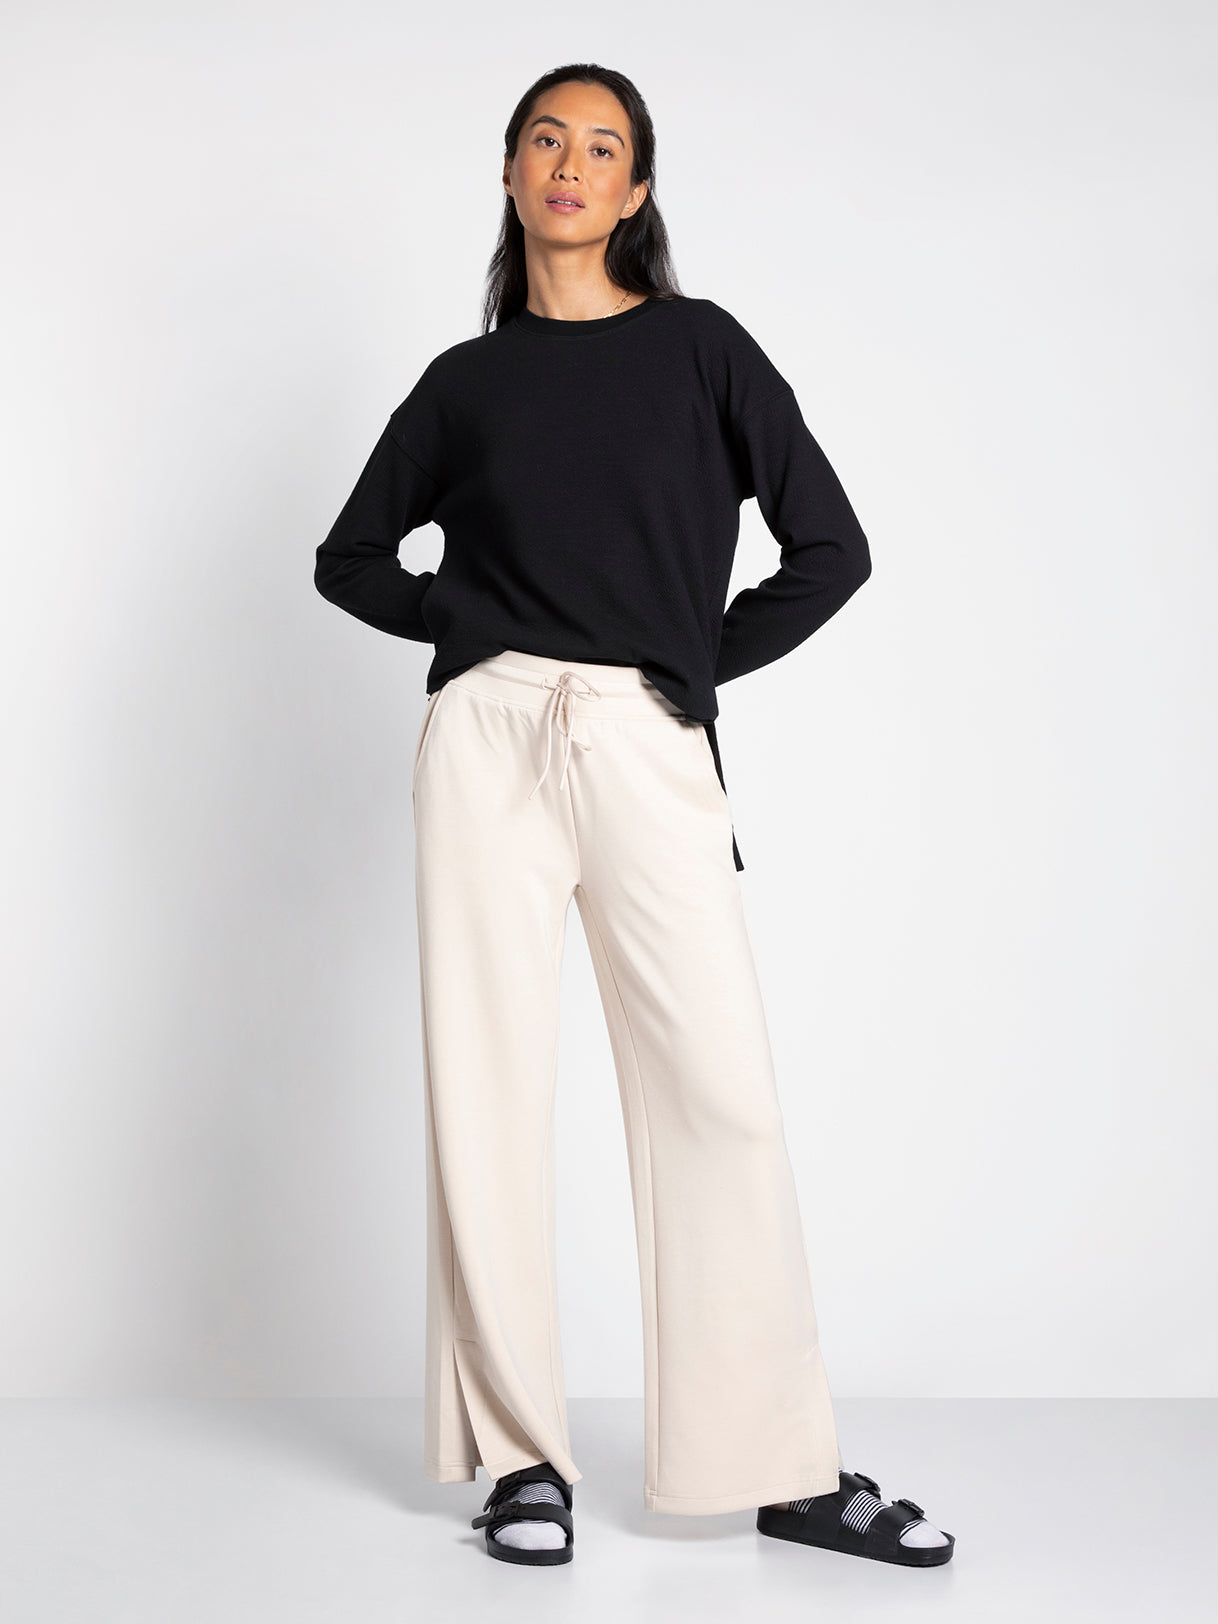 Vedolay Women Pants Dressy Casual Pants For Women